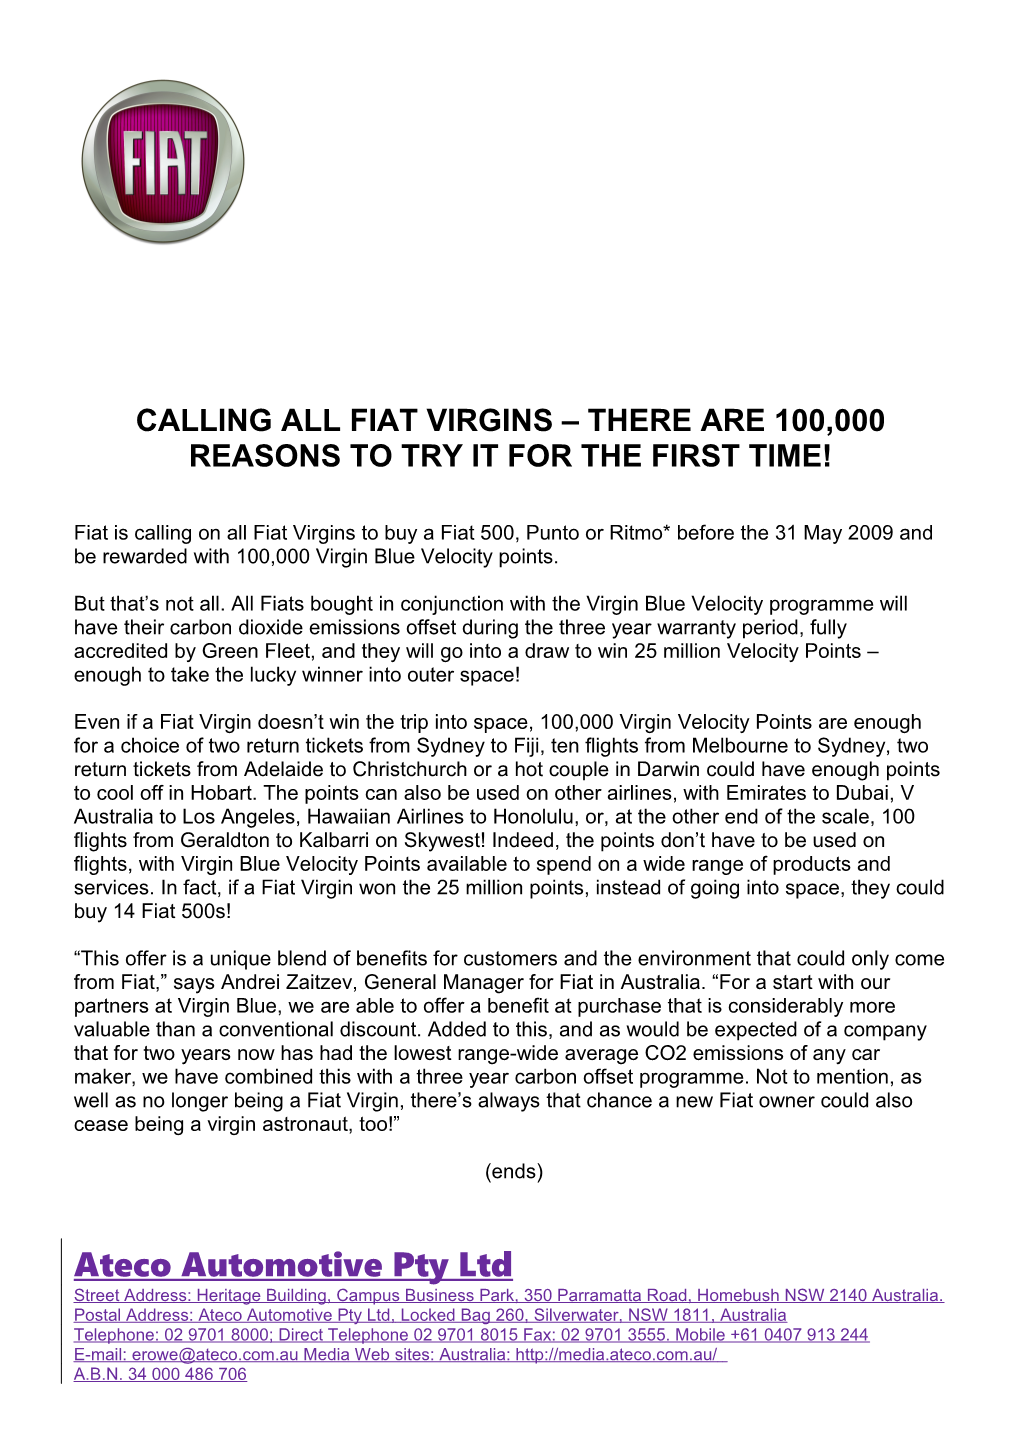 Calling All Fiat Virgins There Are 100,000 Reasons to Try It for the First Time!